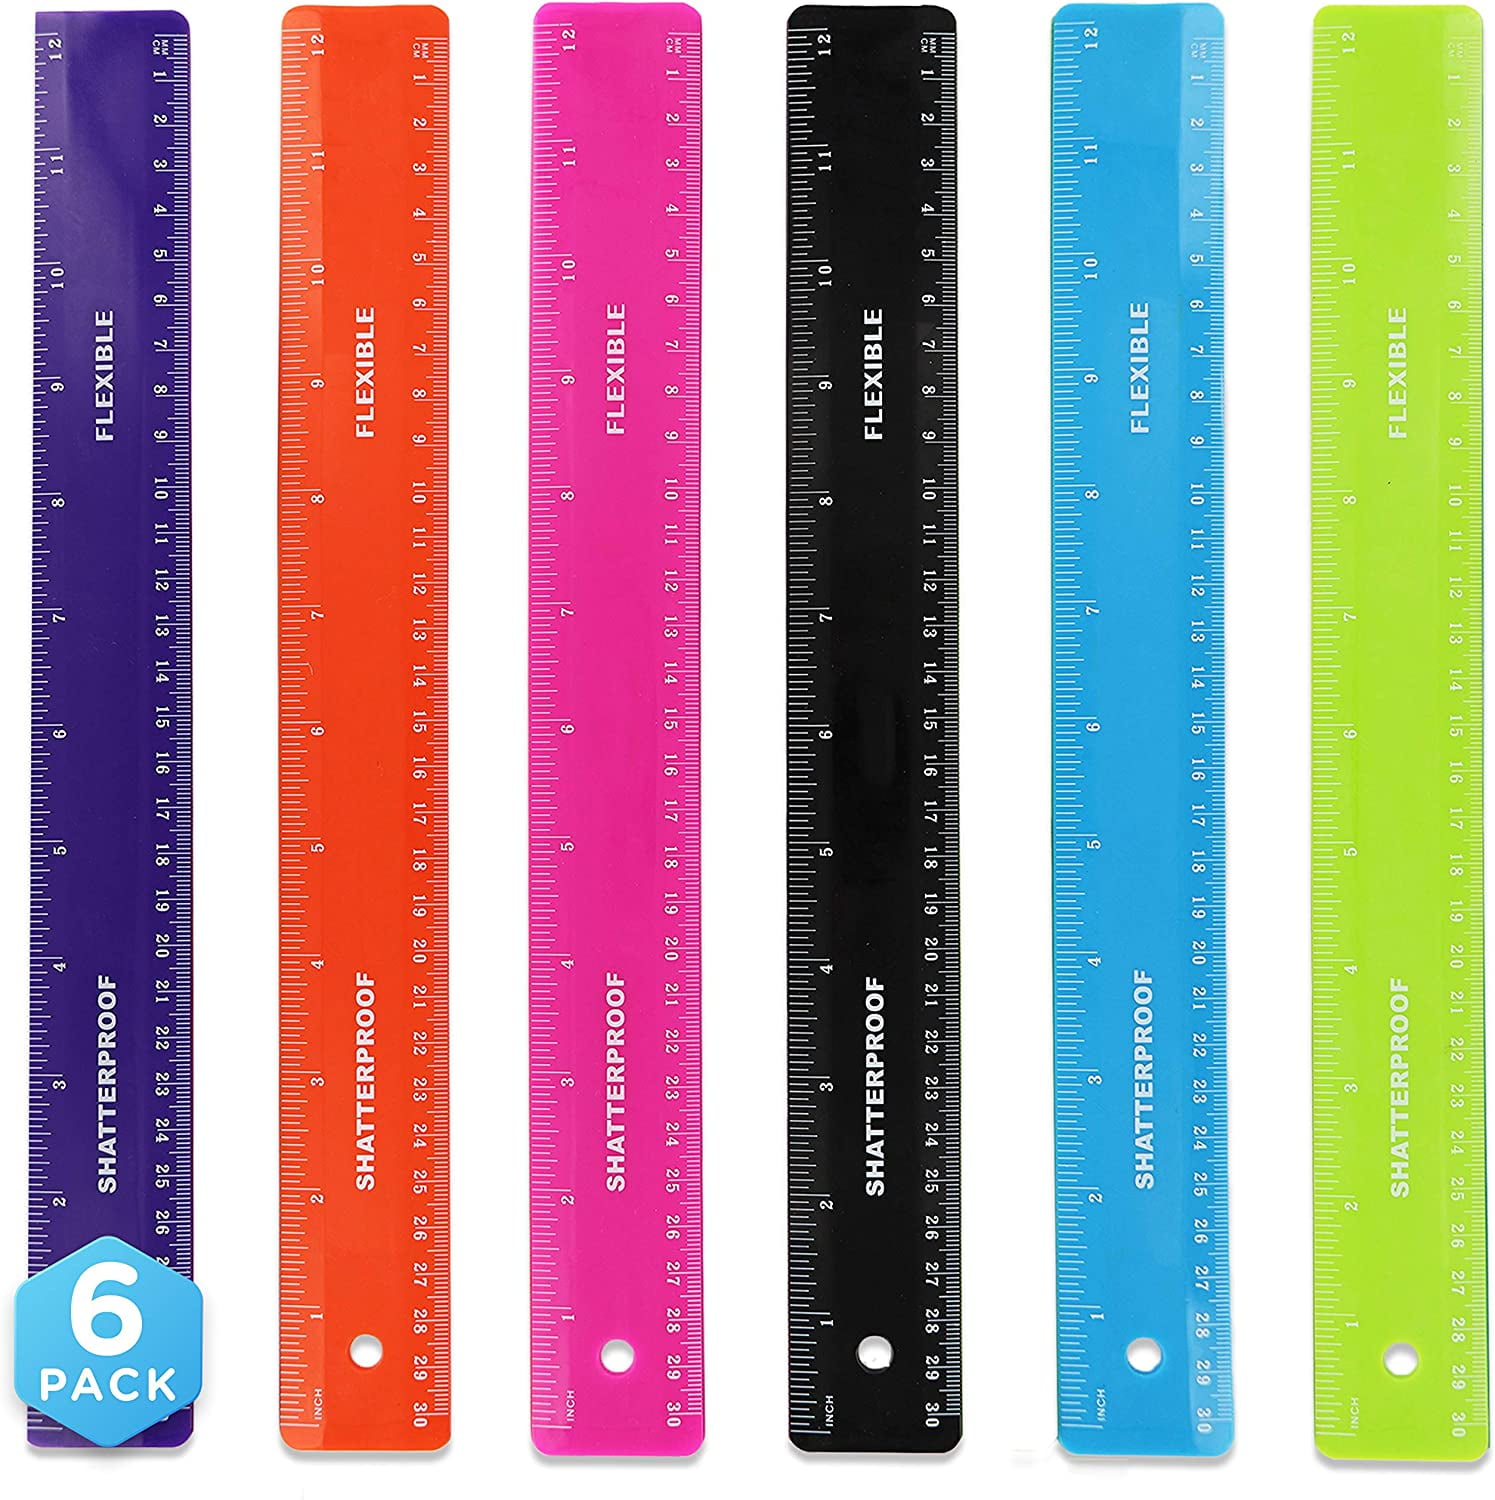 Wiueurtly Flexible Rulers 12 inch Student Transparent Rulers for School Rulers for Student Shatterproof Rulers Office Ruler Straight Soft Ruler, Dual